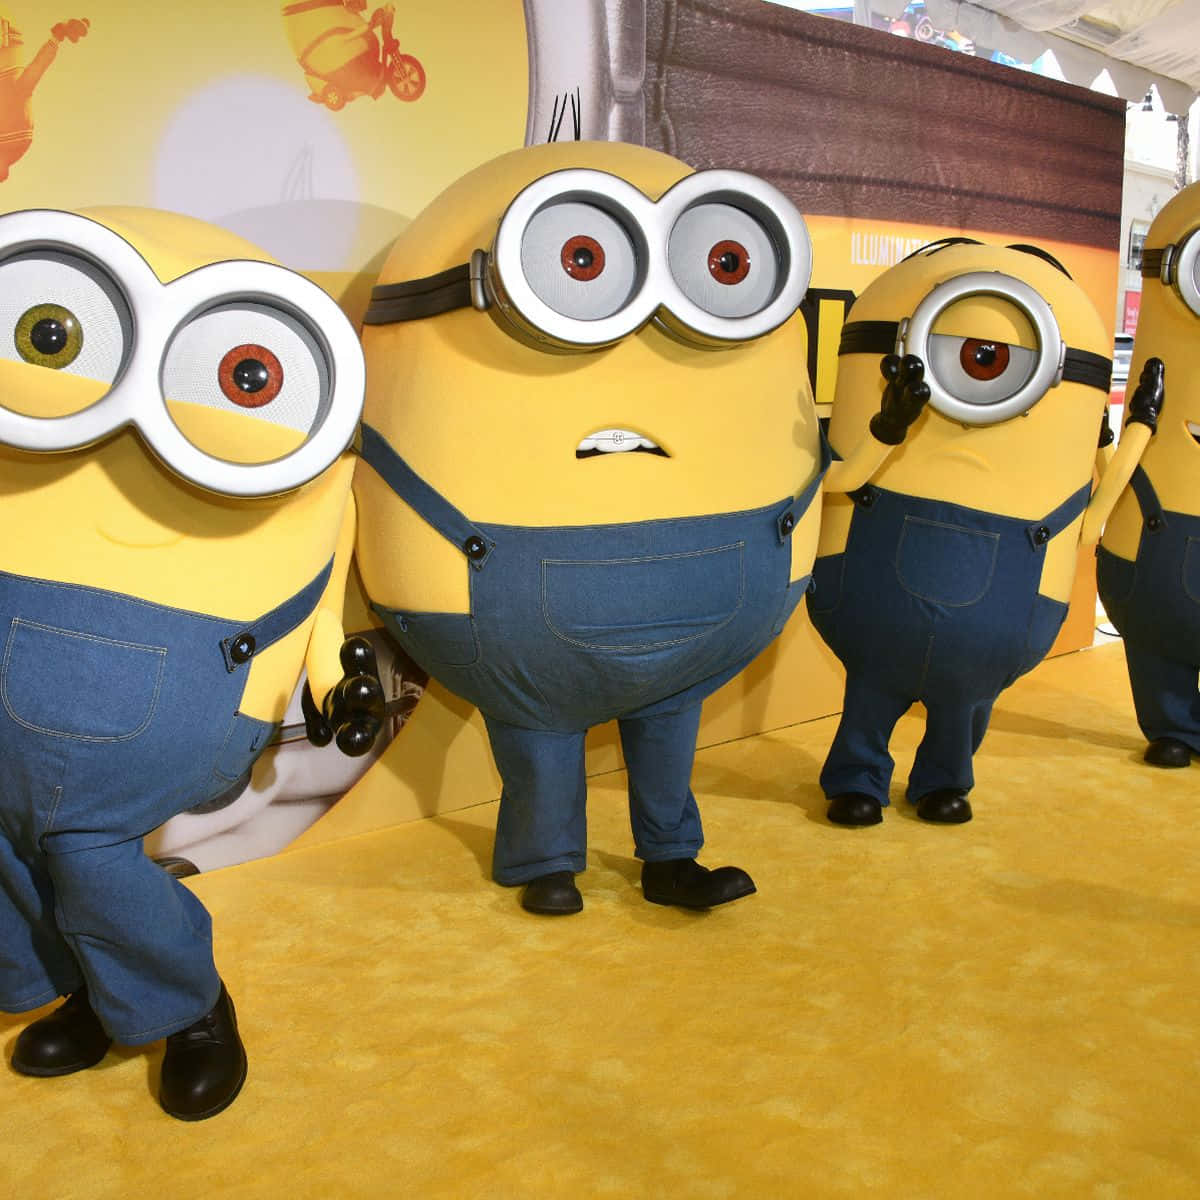 'Say Hi to the Minions'